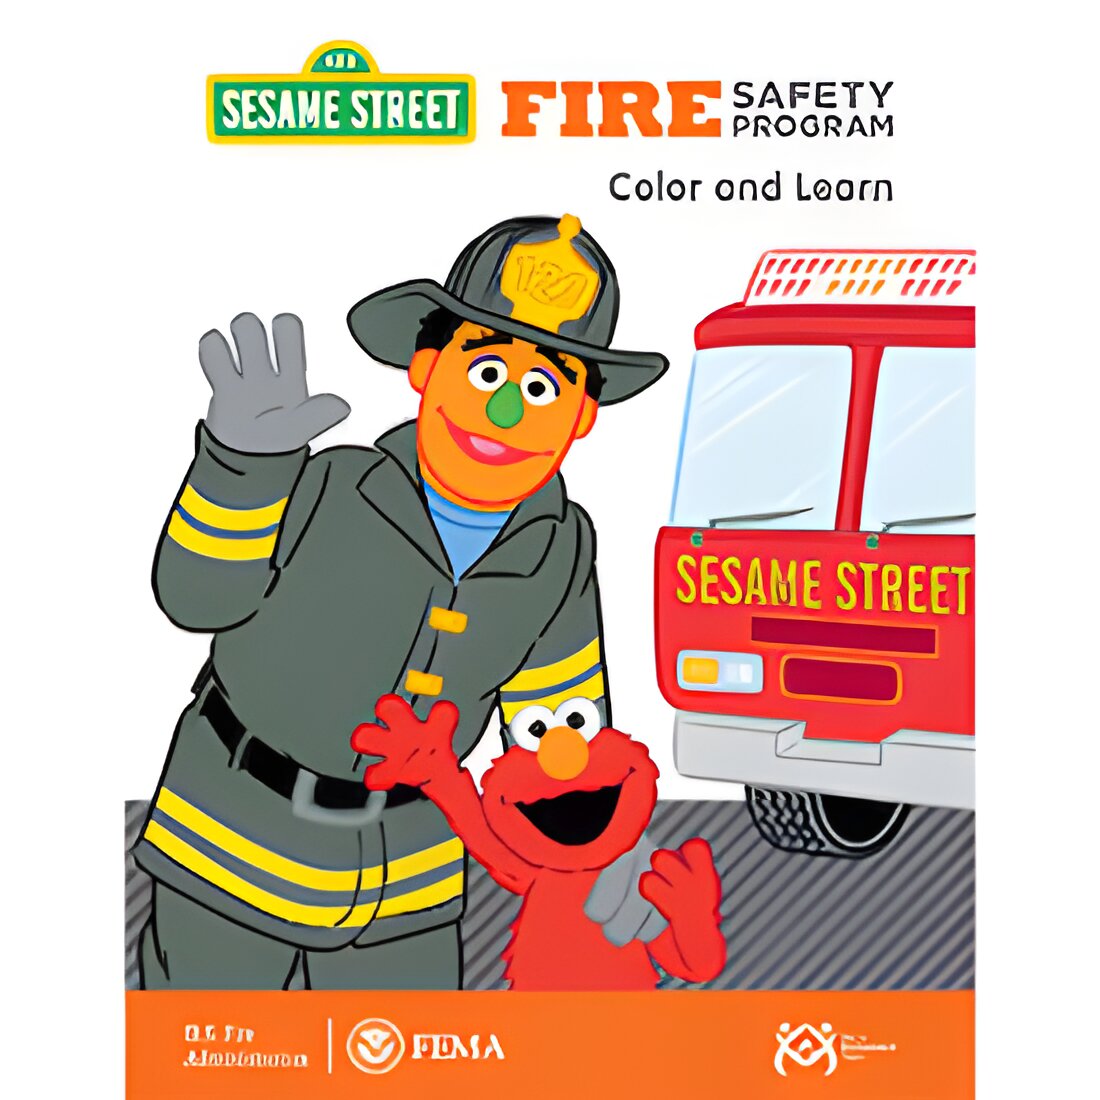 Free Sesame Street Fire Safety Program Color and Learn Booklet